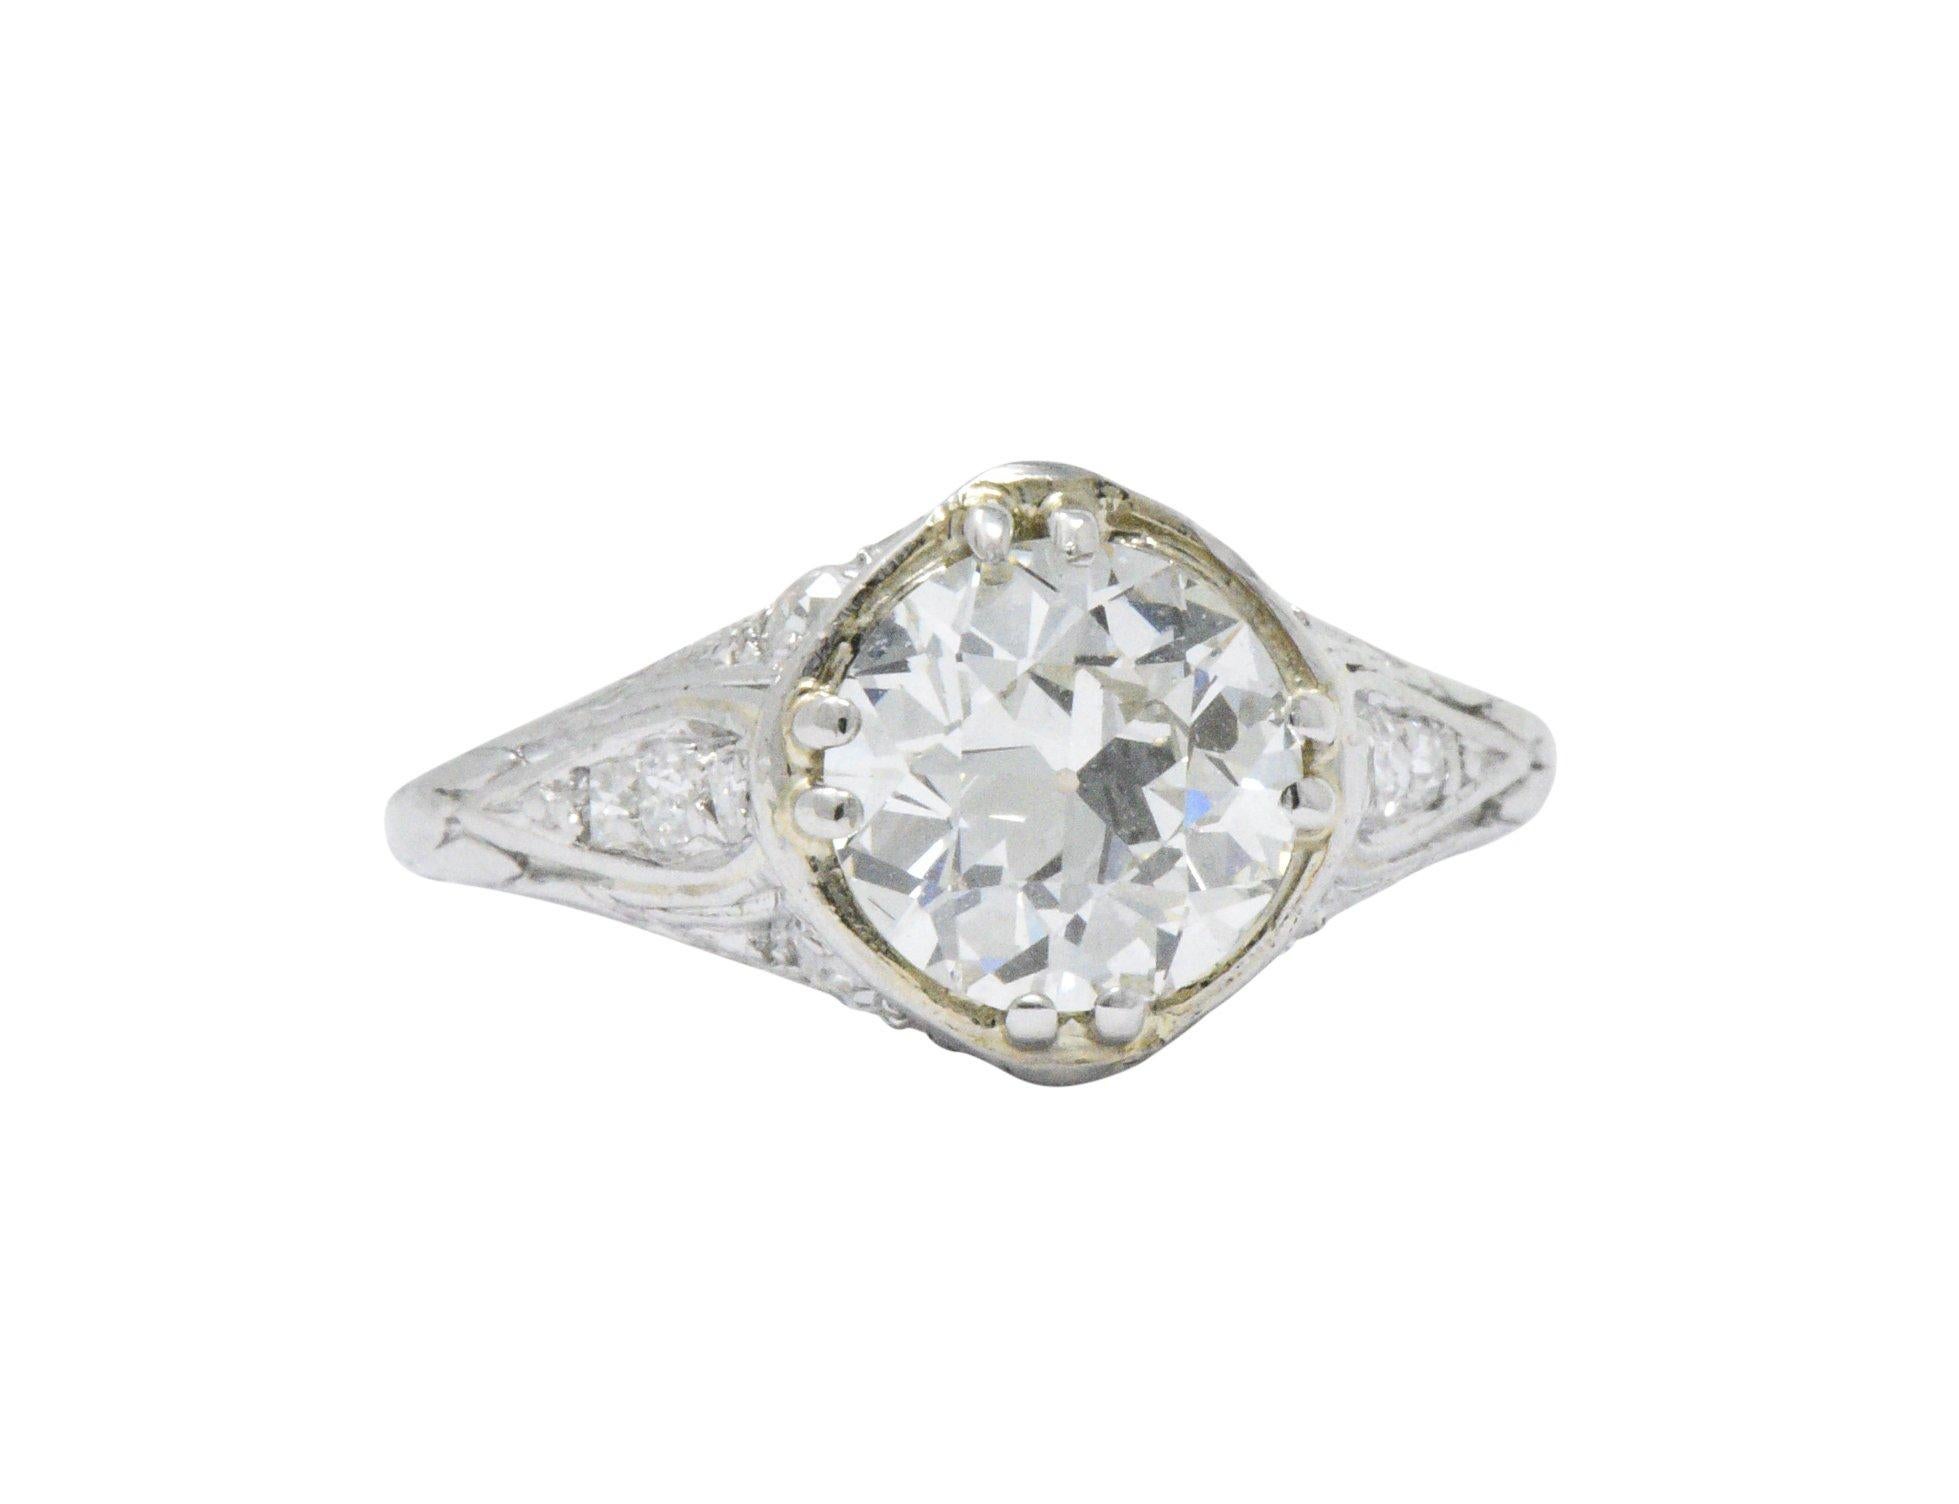 Centering an old European cut diamond weighing 1.54 carats, K color with VS2 clarity

Set low by double prongs in an subtly engraved mounting accented throughout by single cut diamonds weighing approximately 0.22 carat total; eye-clean and